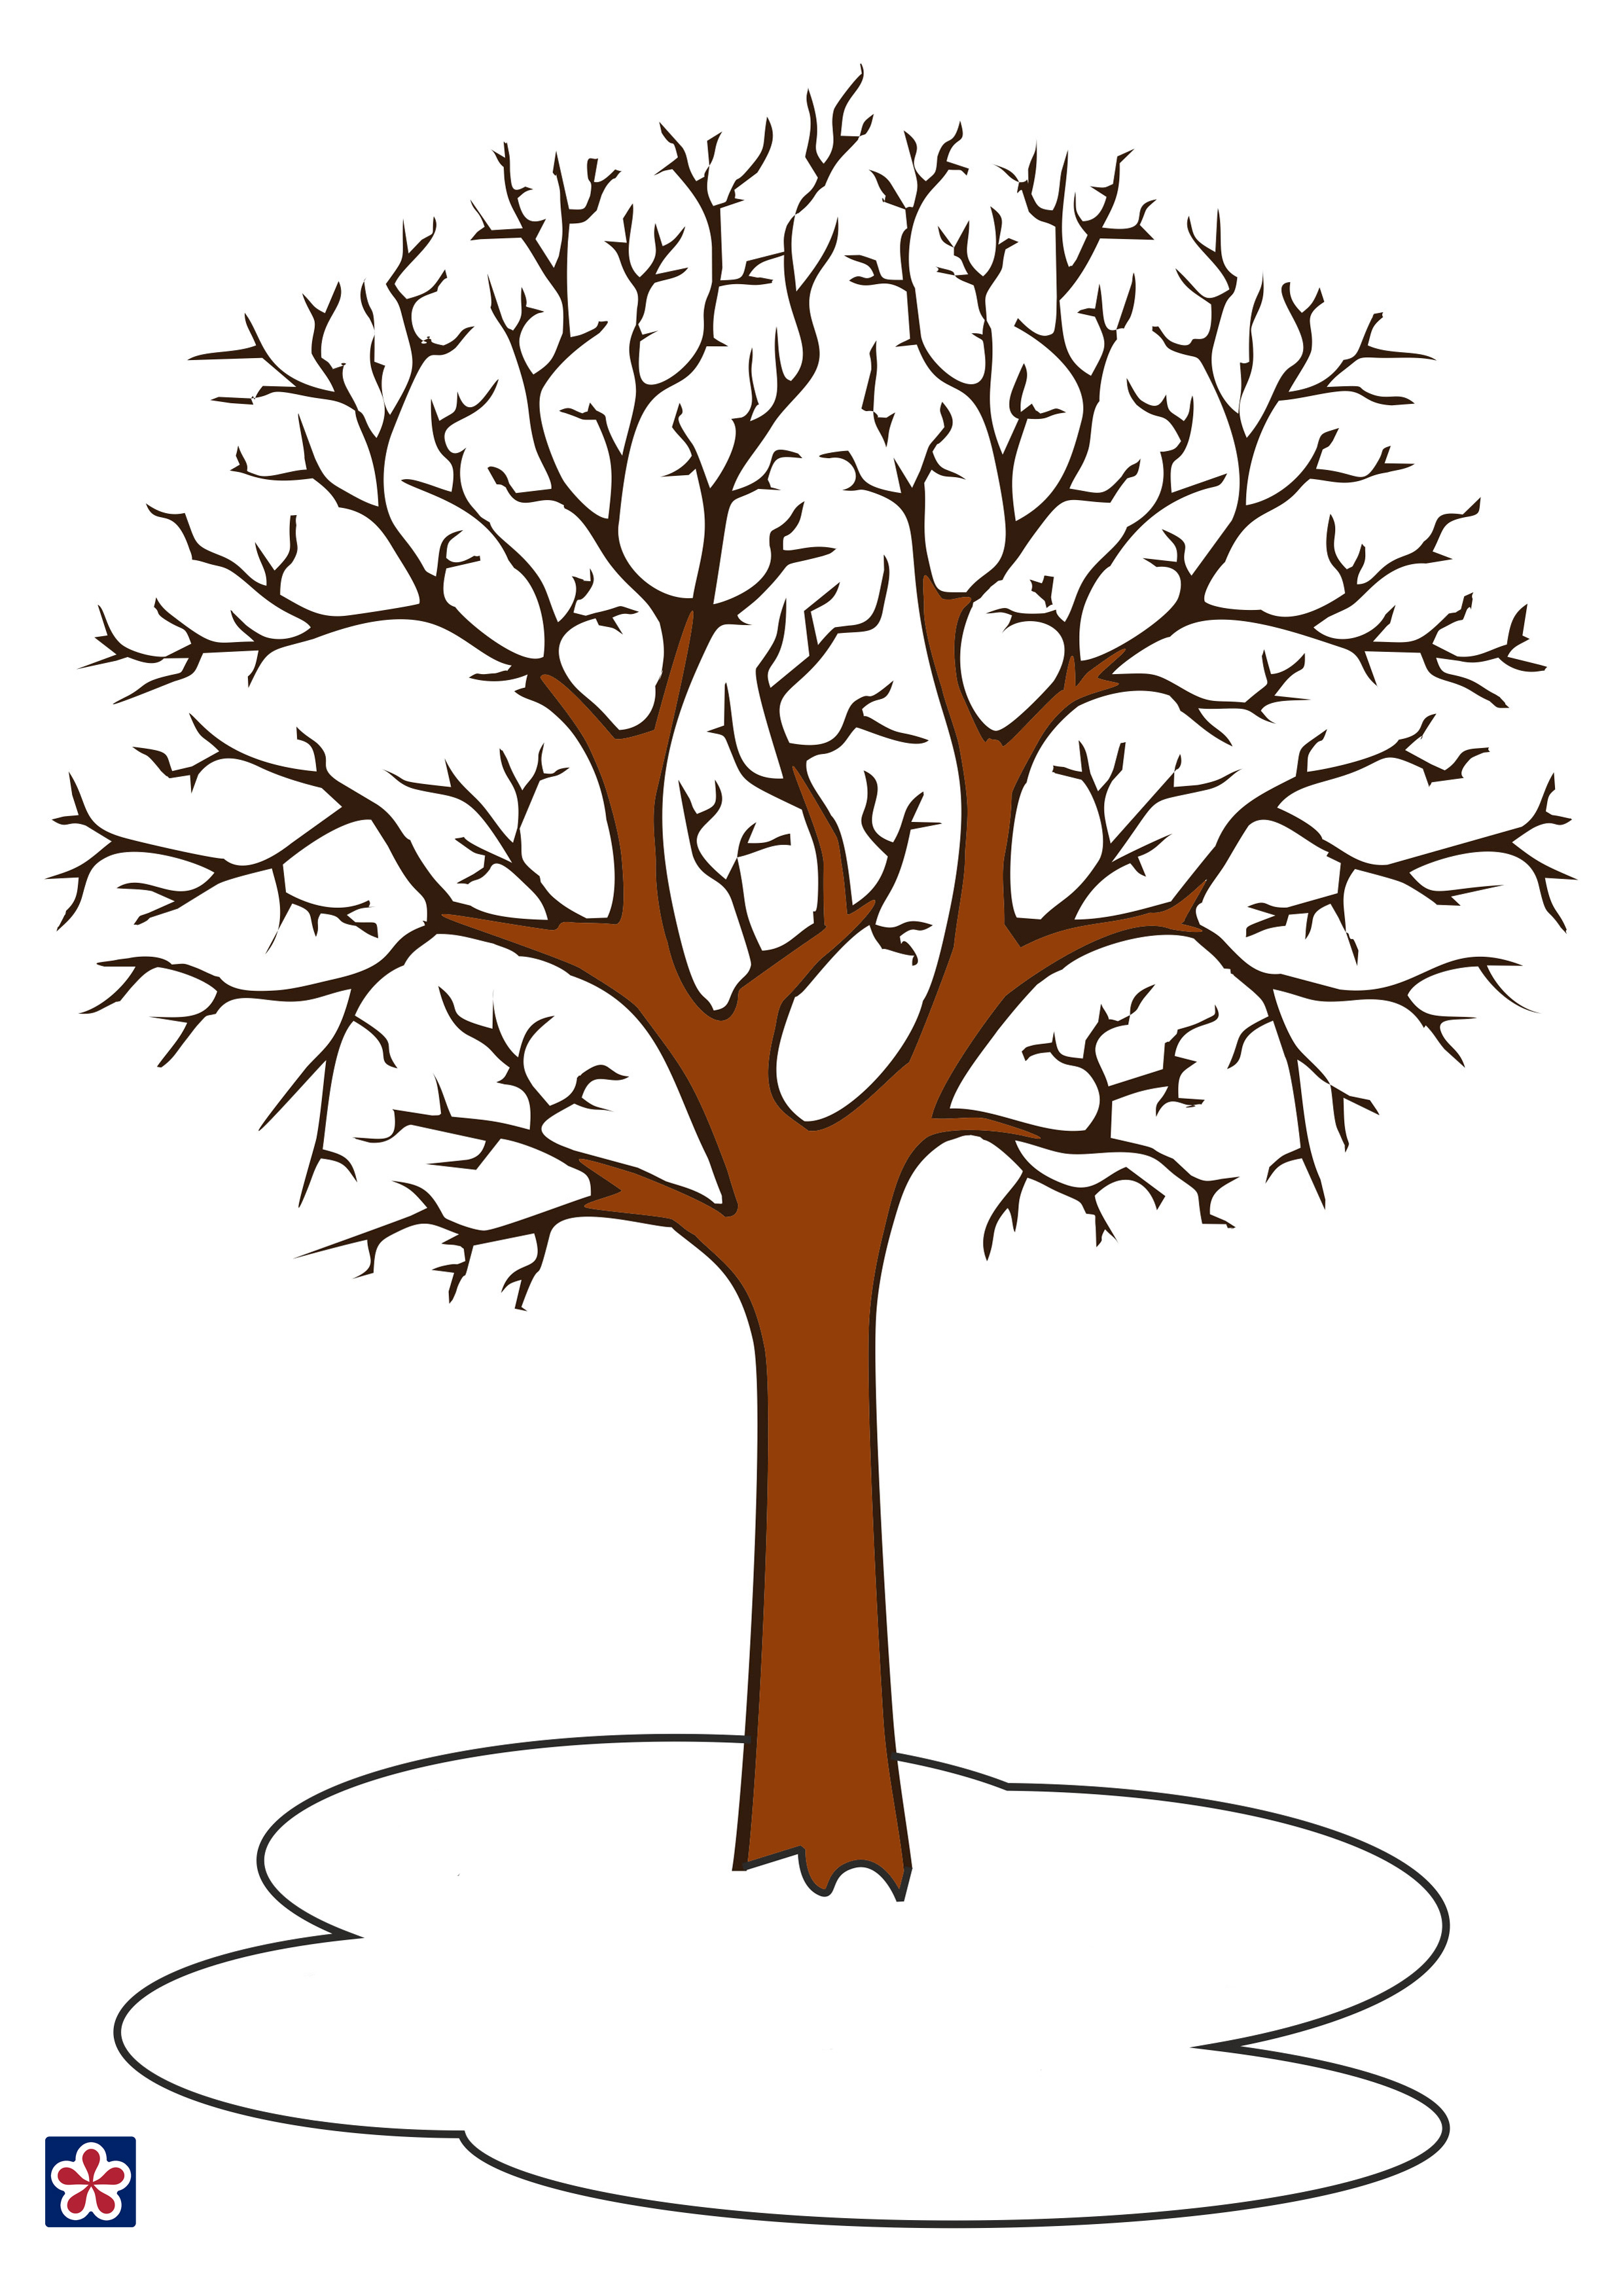 Printable Tree Template With Leaves Printable Templates